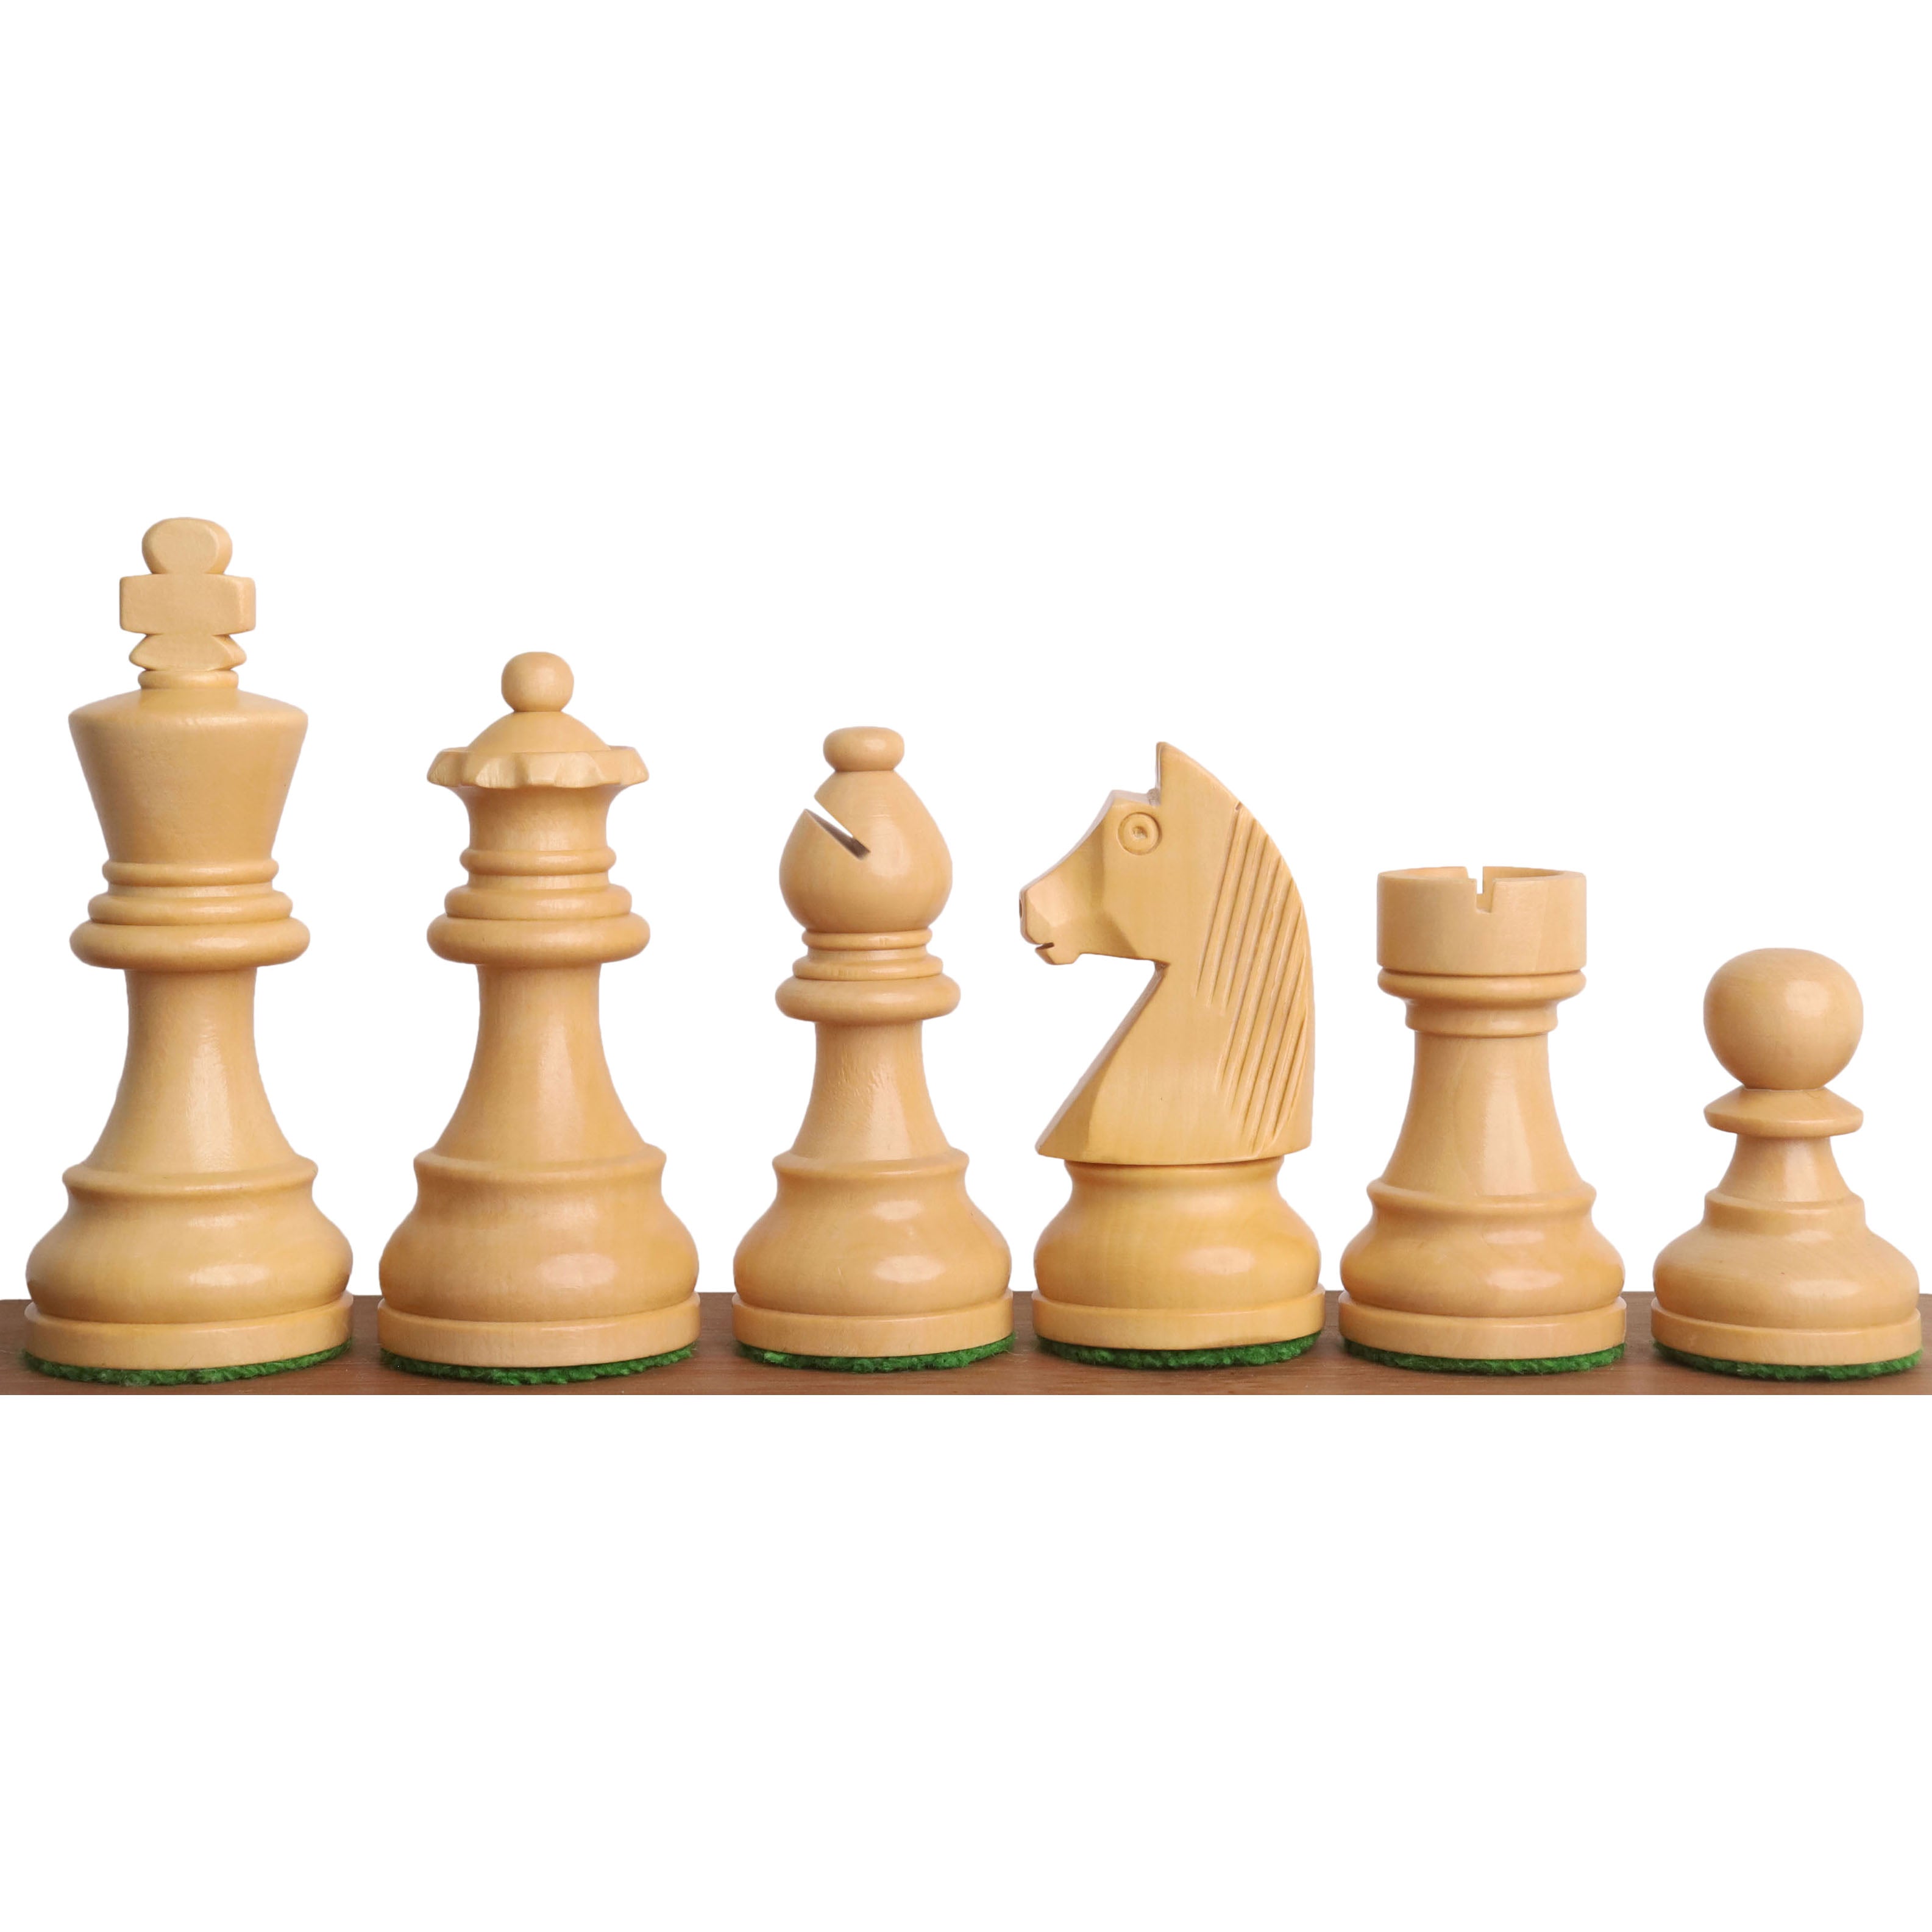 3.3" Tournament Staunton Chess Pieces Only Set - Golden Rosewood - Compact size